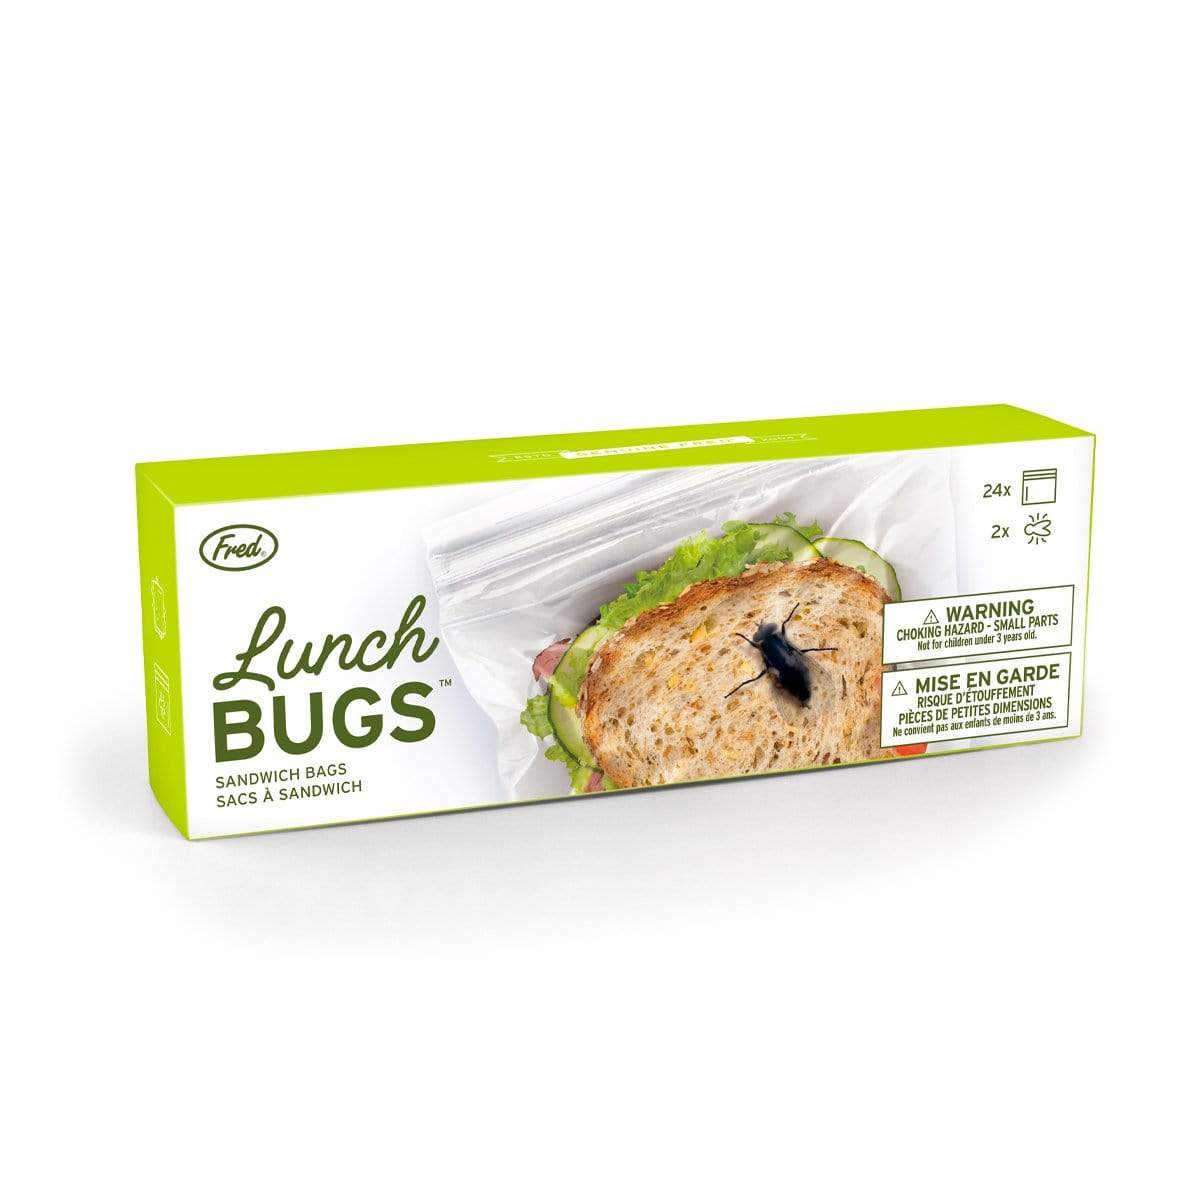 the lunch bugs box on a white background